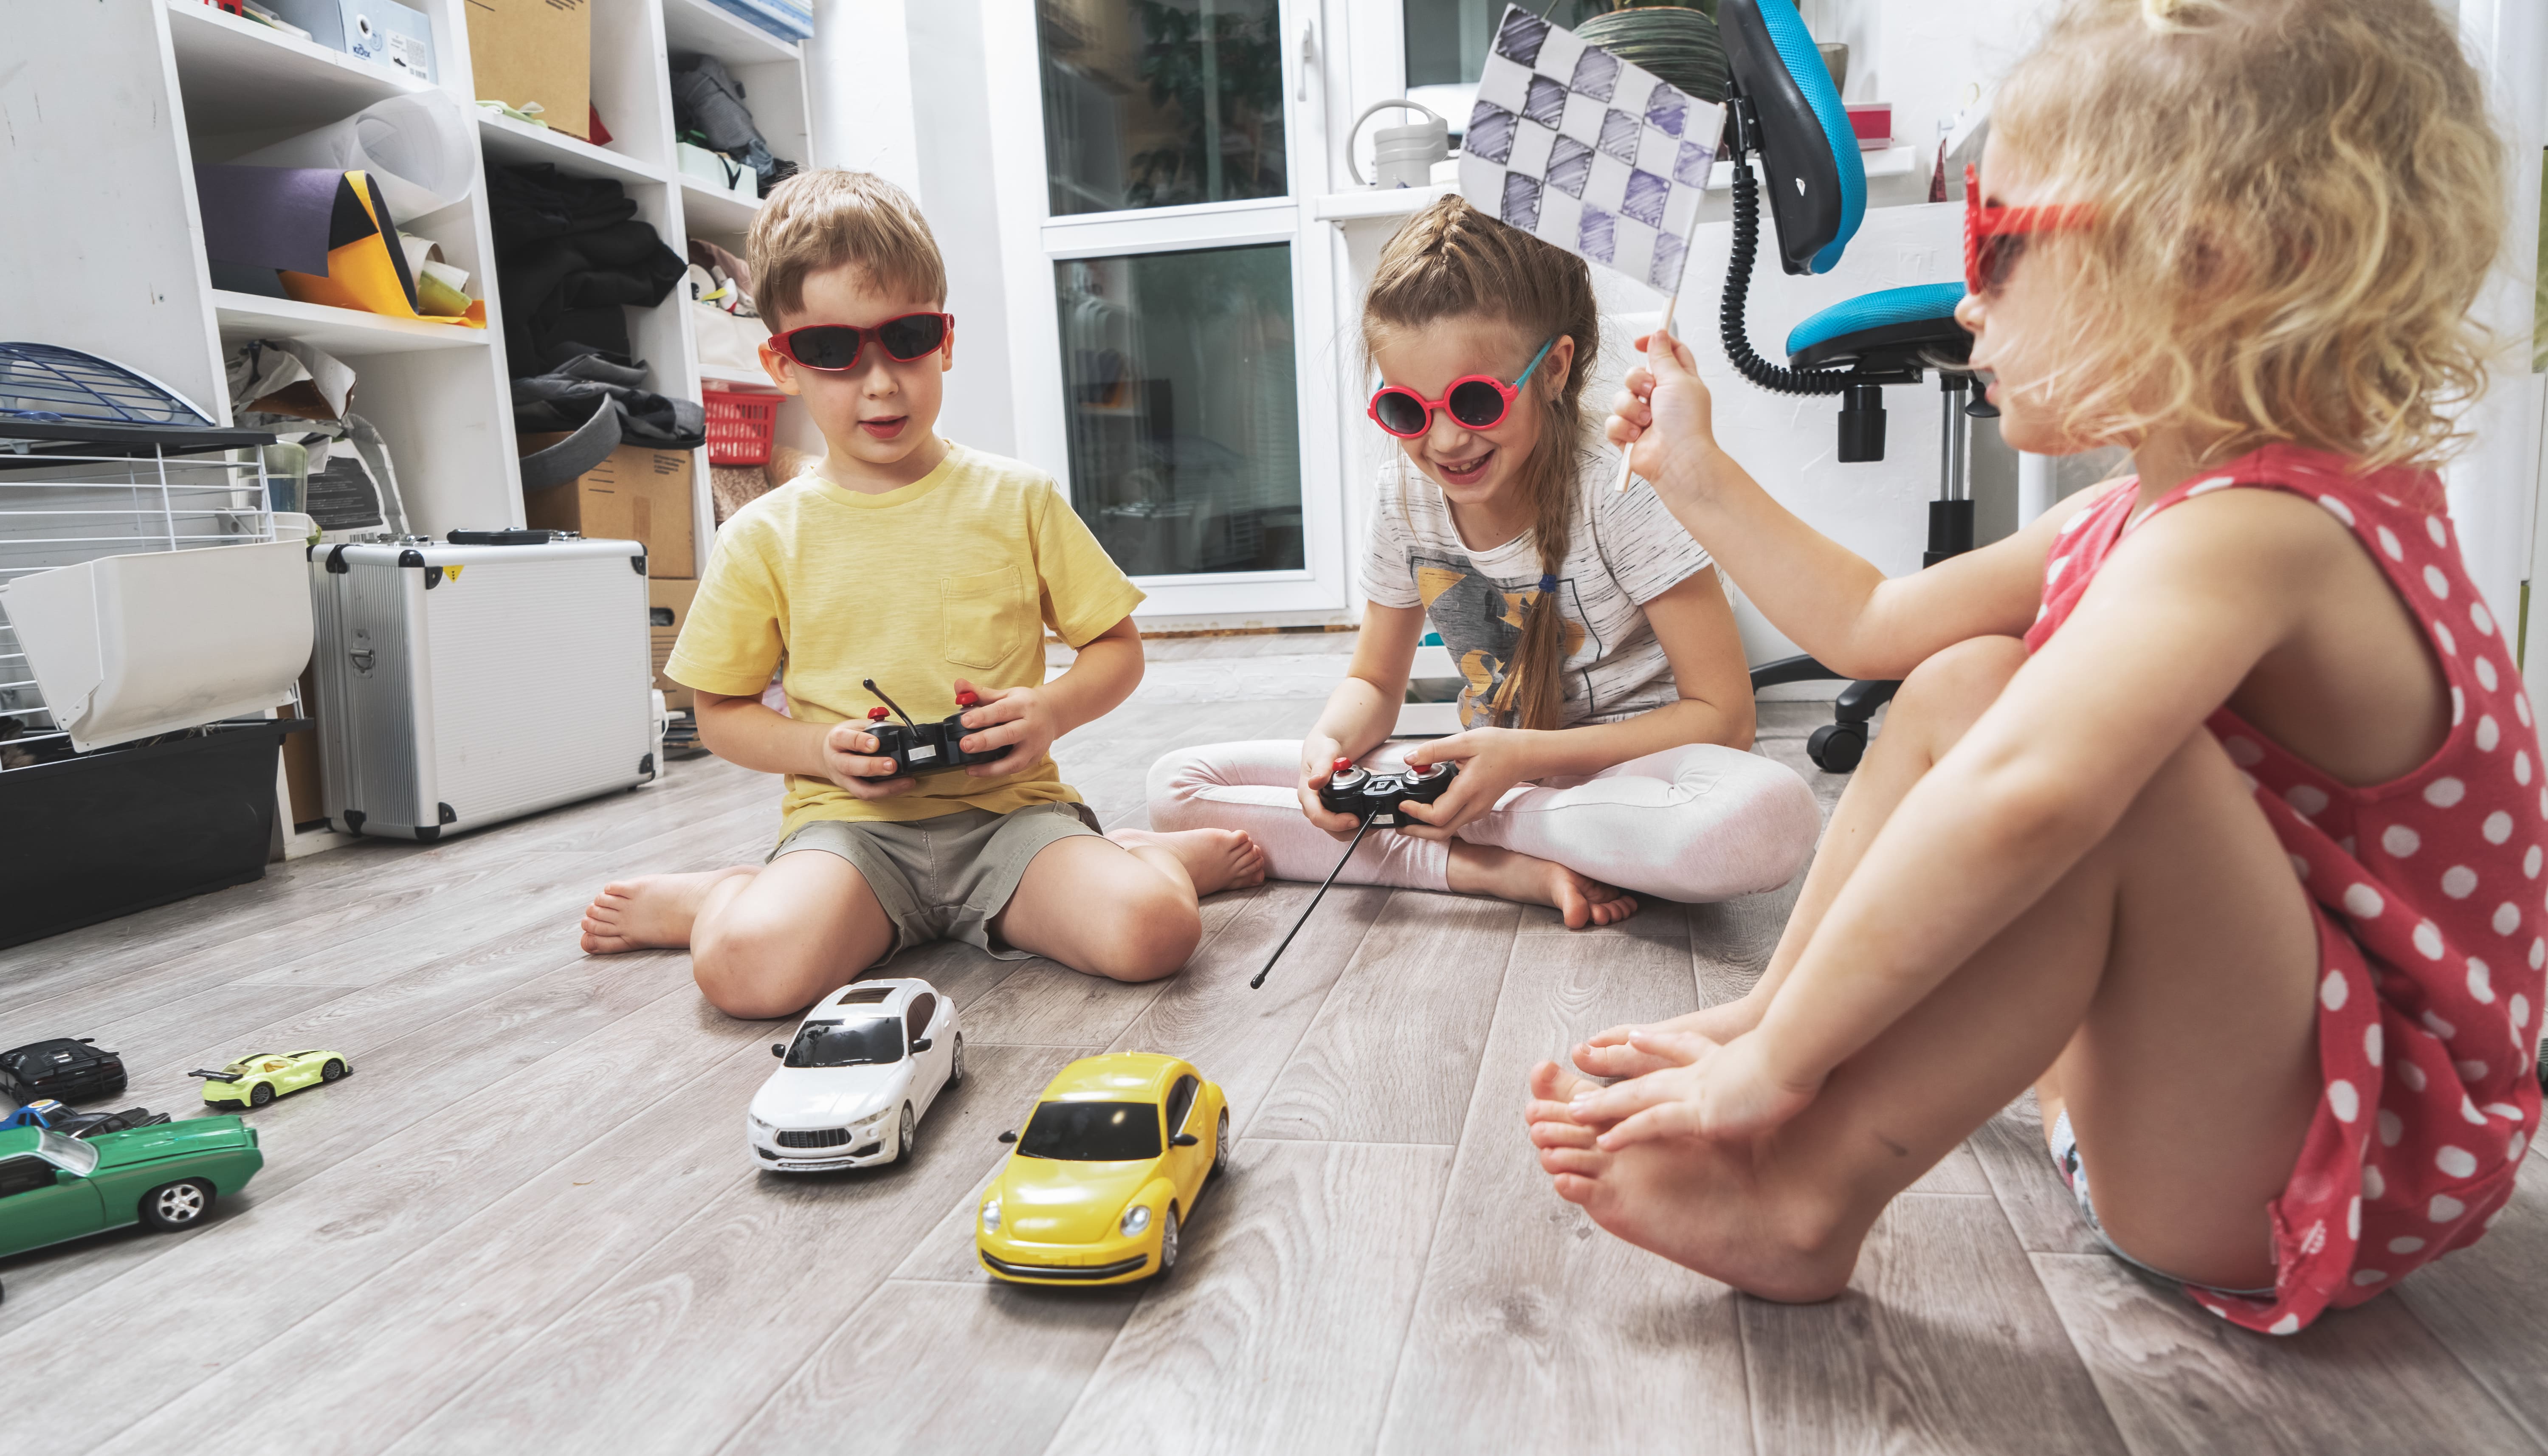 Three kids sat on the floor hosting a remote control car race while organising their toys